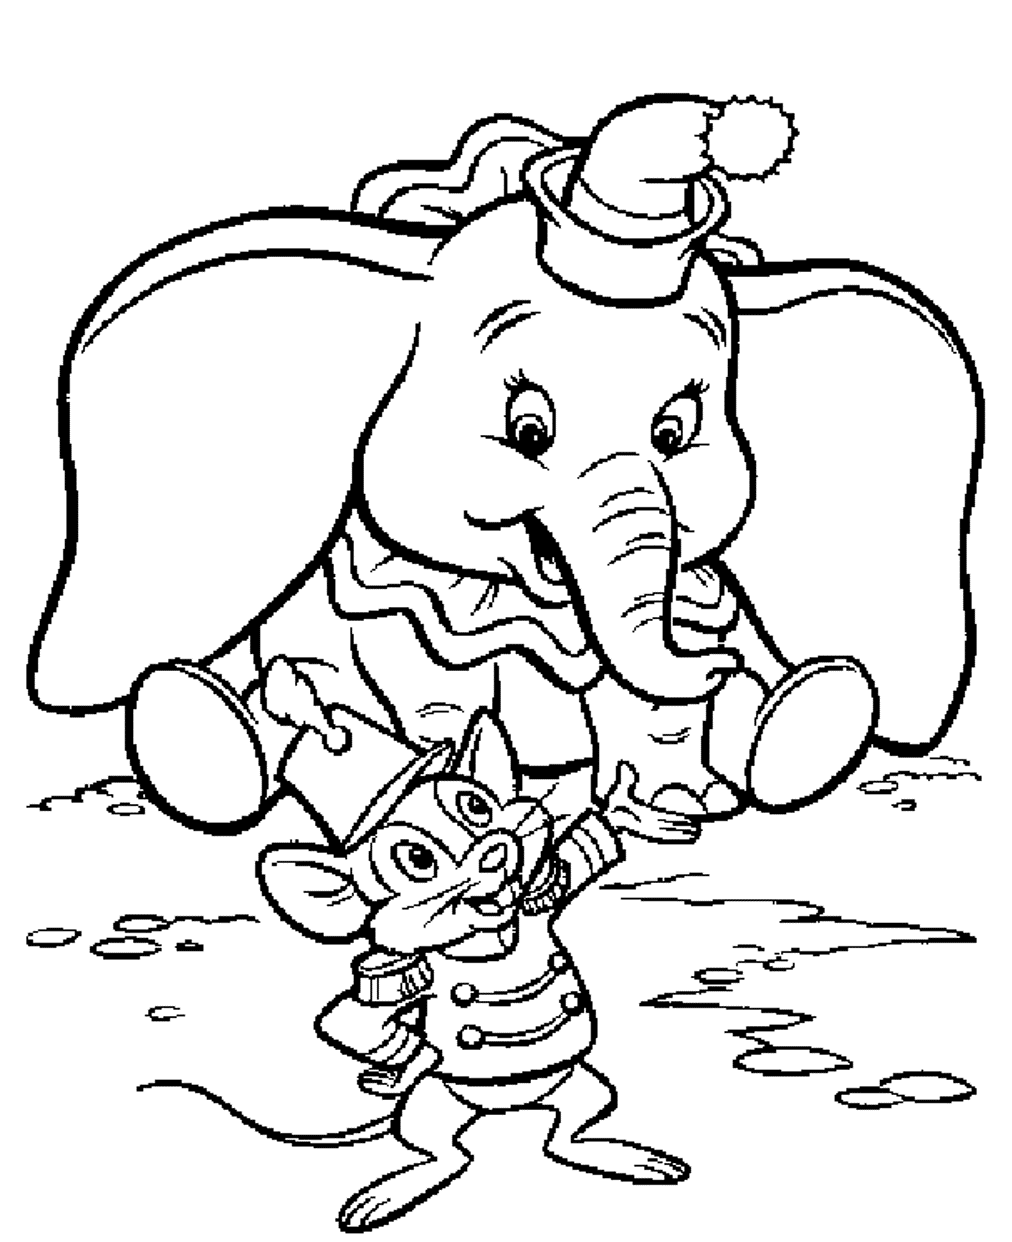 Cartoon Coloring Pages Dumbo Free | Cartoon Coloring pages of ...